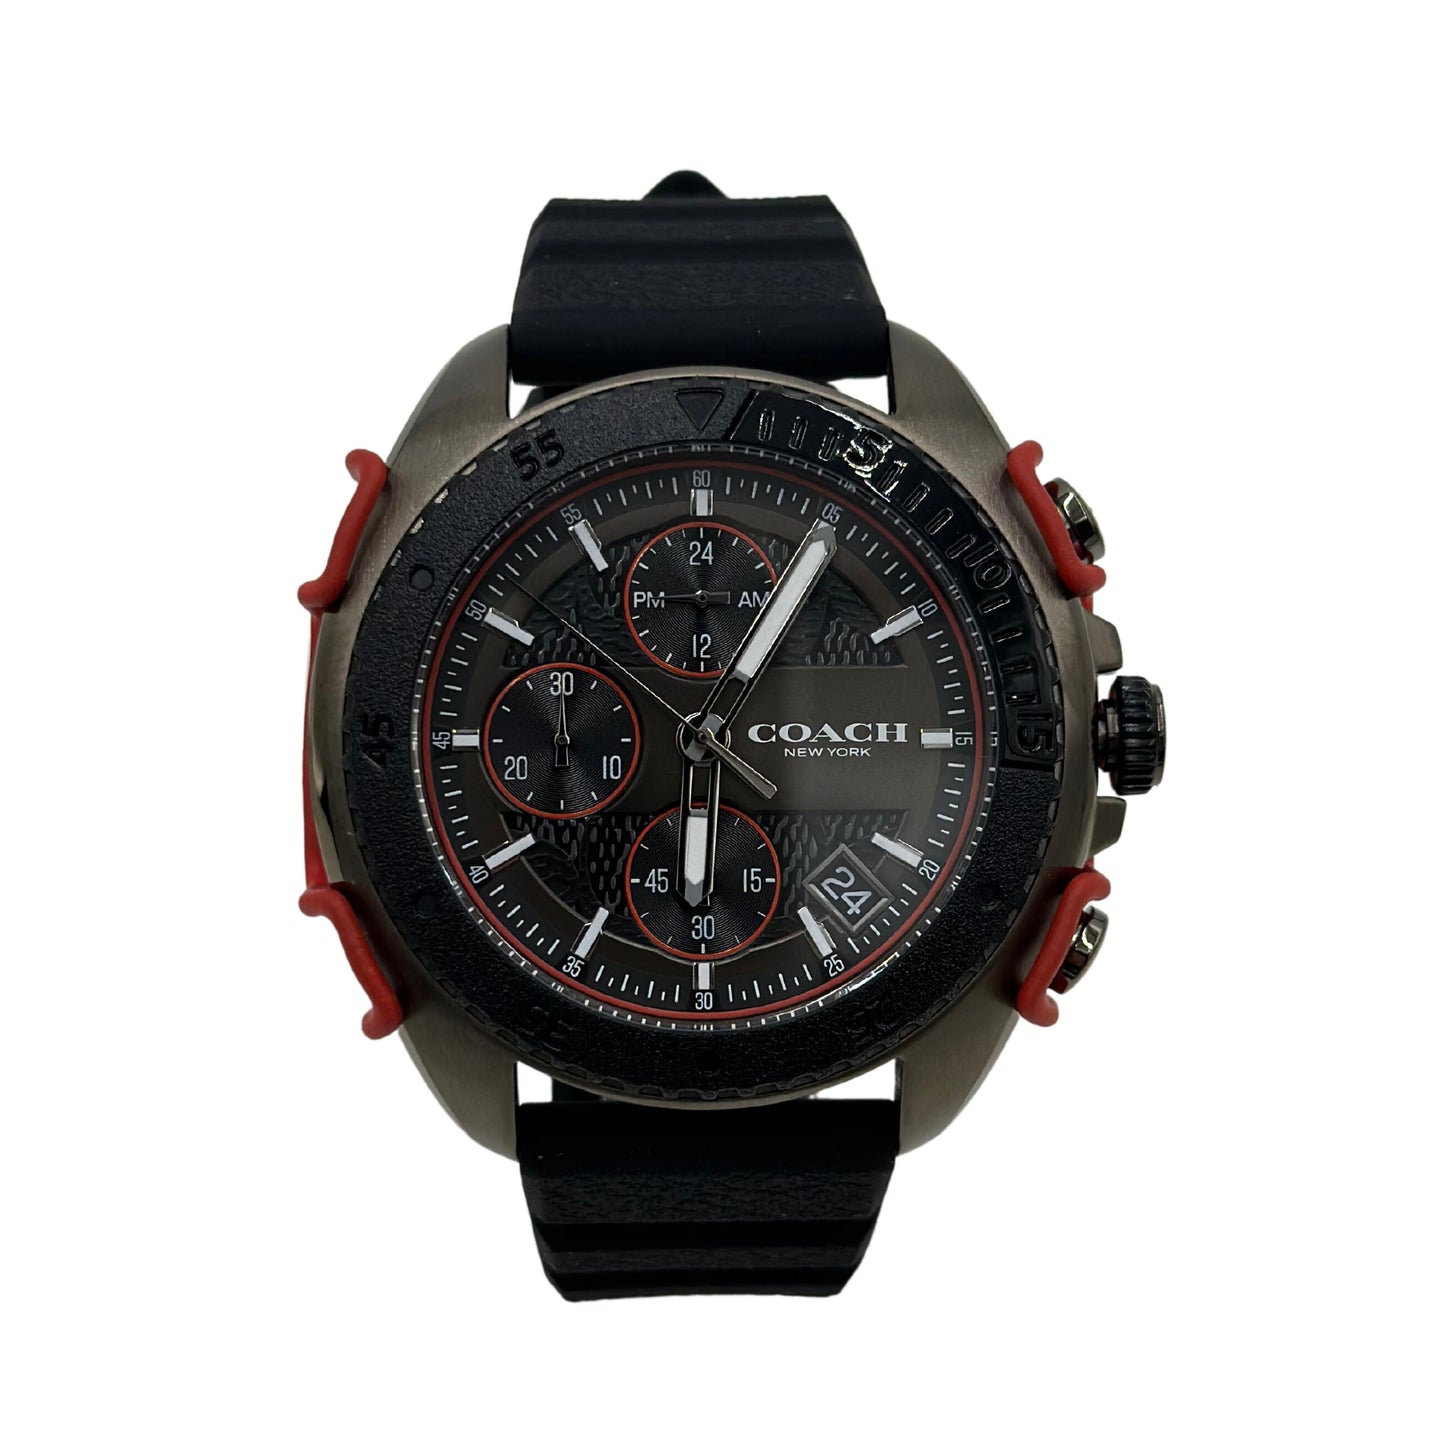 Coach Chronograph Black Silicone Band 45 mm Case Men's Watch 14602453